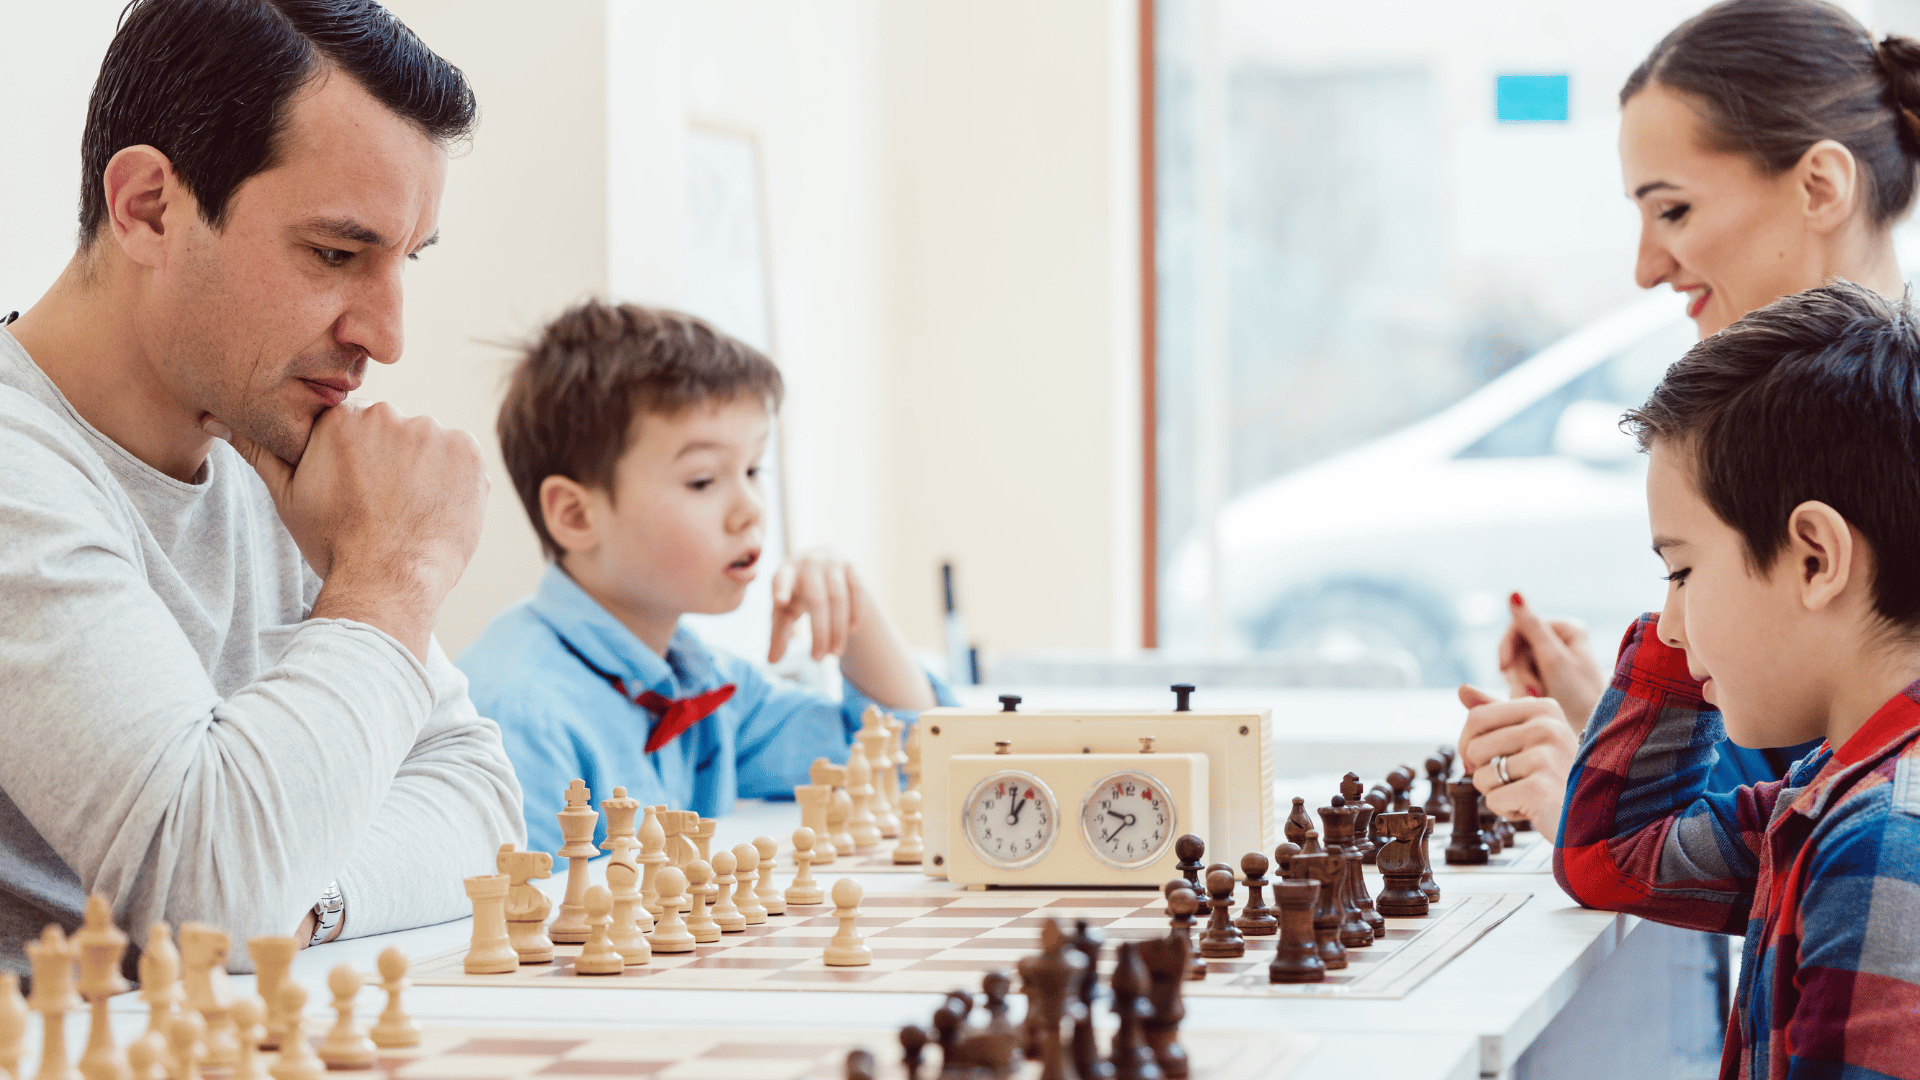 Aimchess Review: How Effective Is it in Analyzing and Training Chess Abilities?